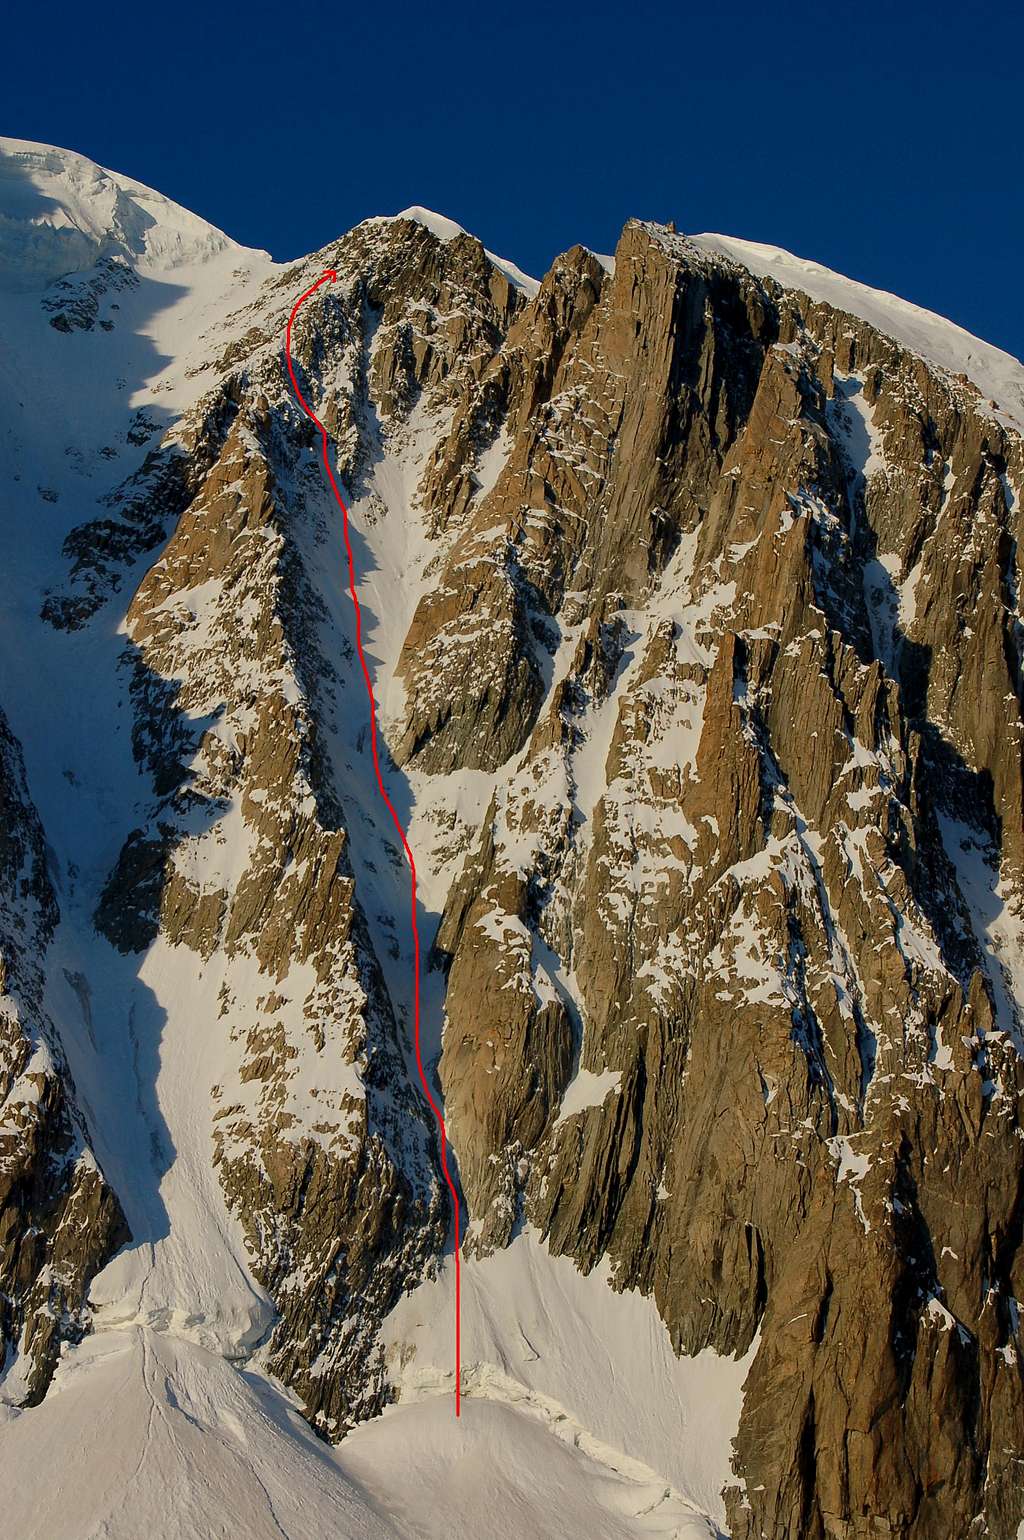 The Direct Finish on Jager Couloir